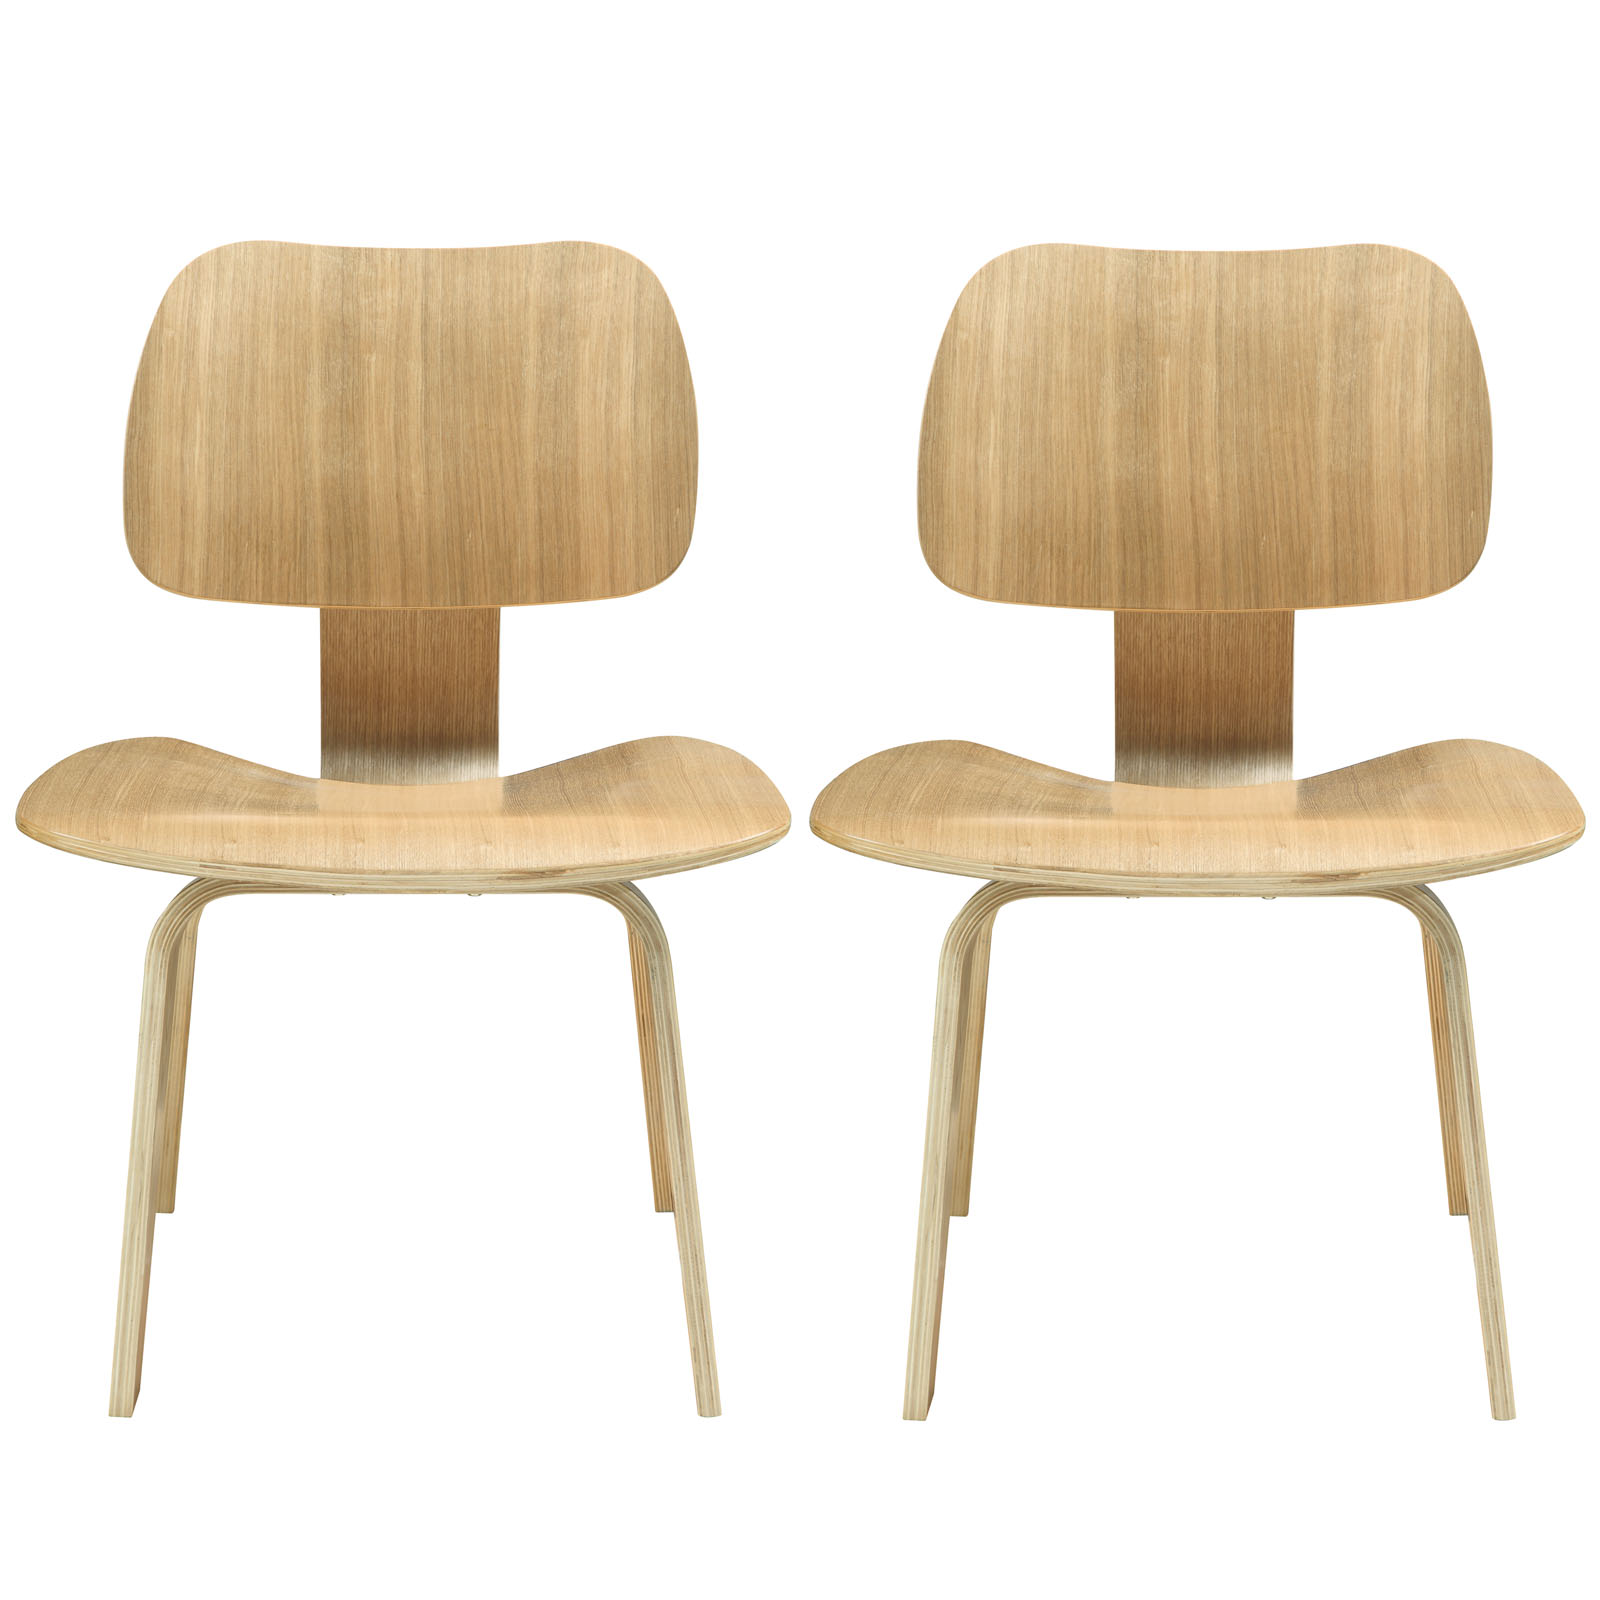 Modway Fathom Mid-Century Modern Molded Plywood Two Kitchen and Dining Room Chairs in Natural